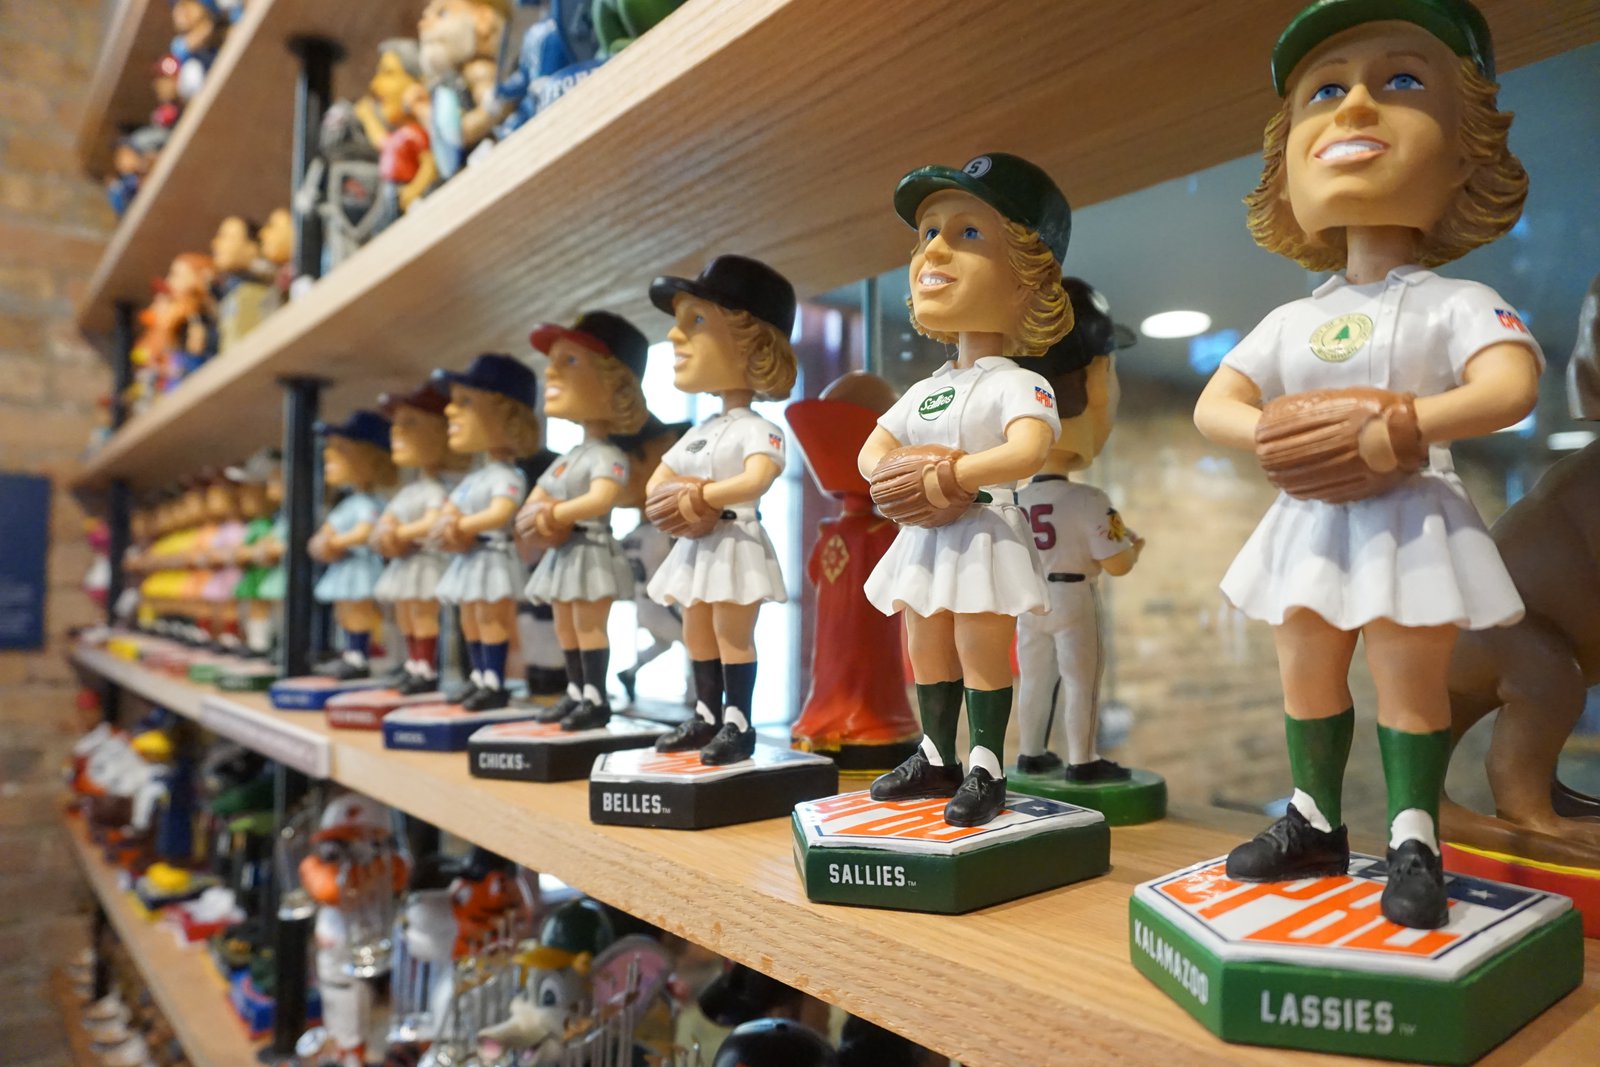 What Do You Mean By Sports Bobbleheads Wholesale?